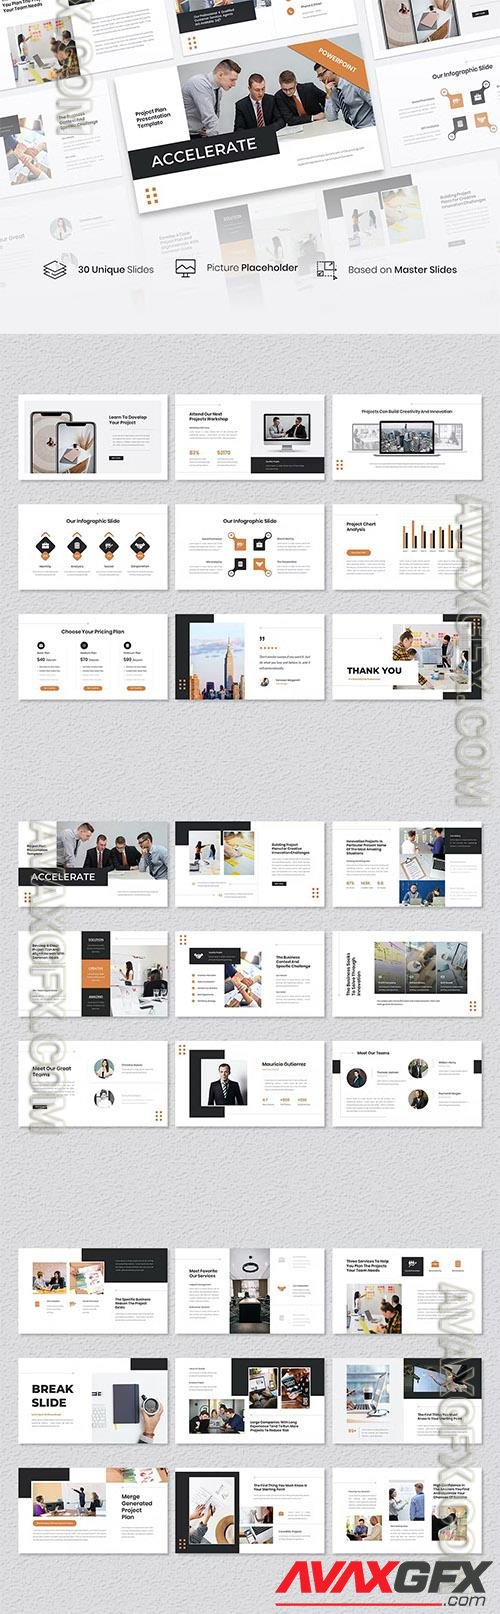 Accelerate – Project Plan PowerPoint Template R2UFPPP